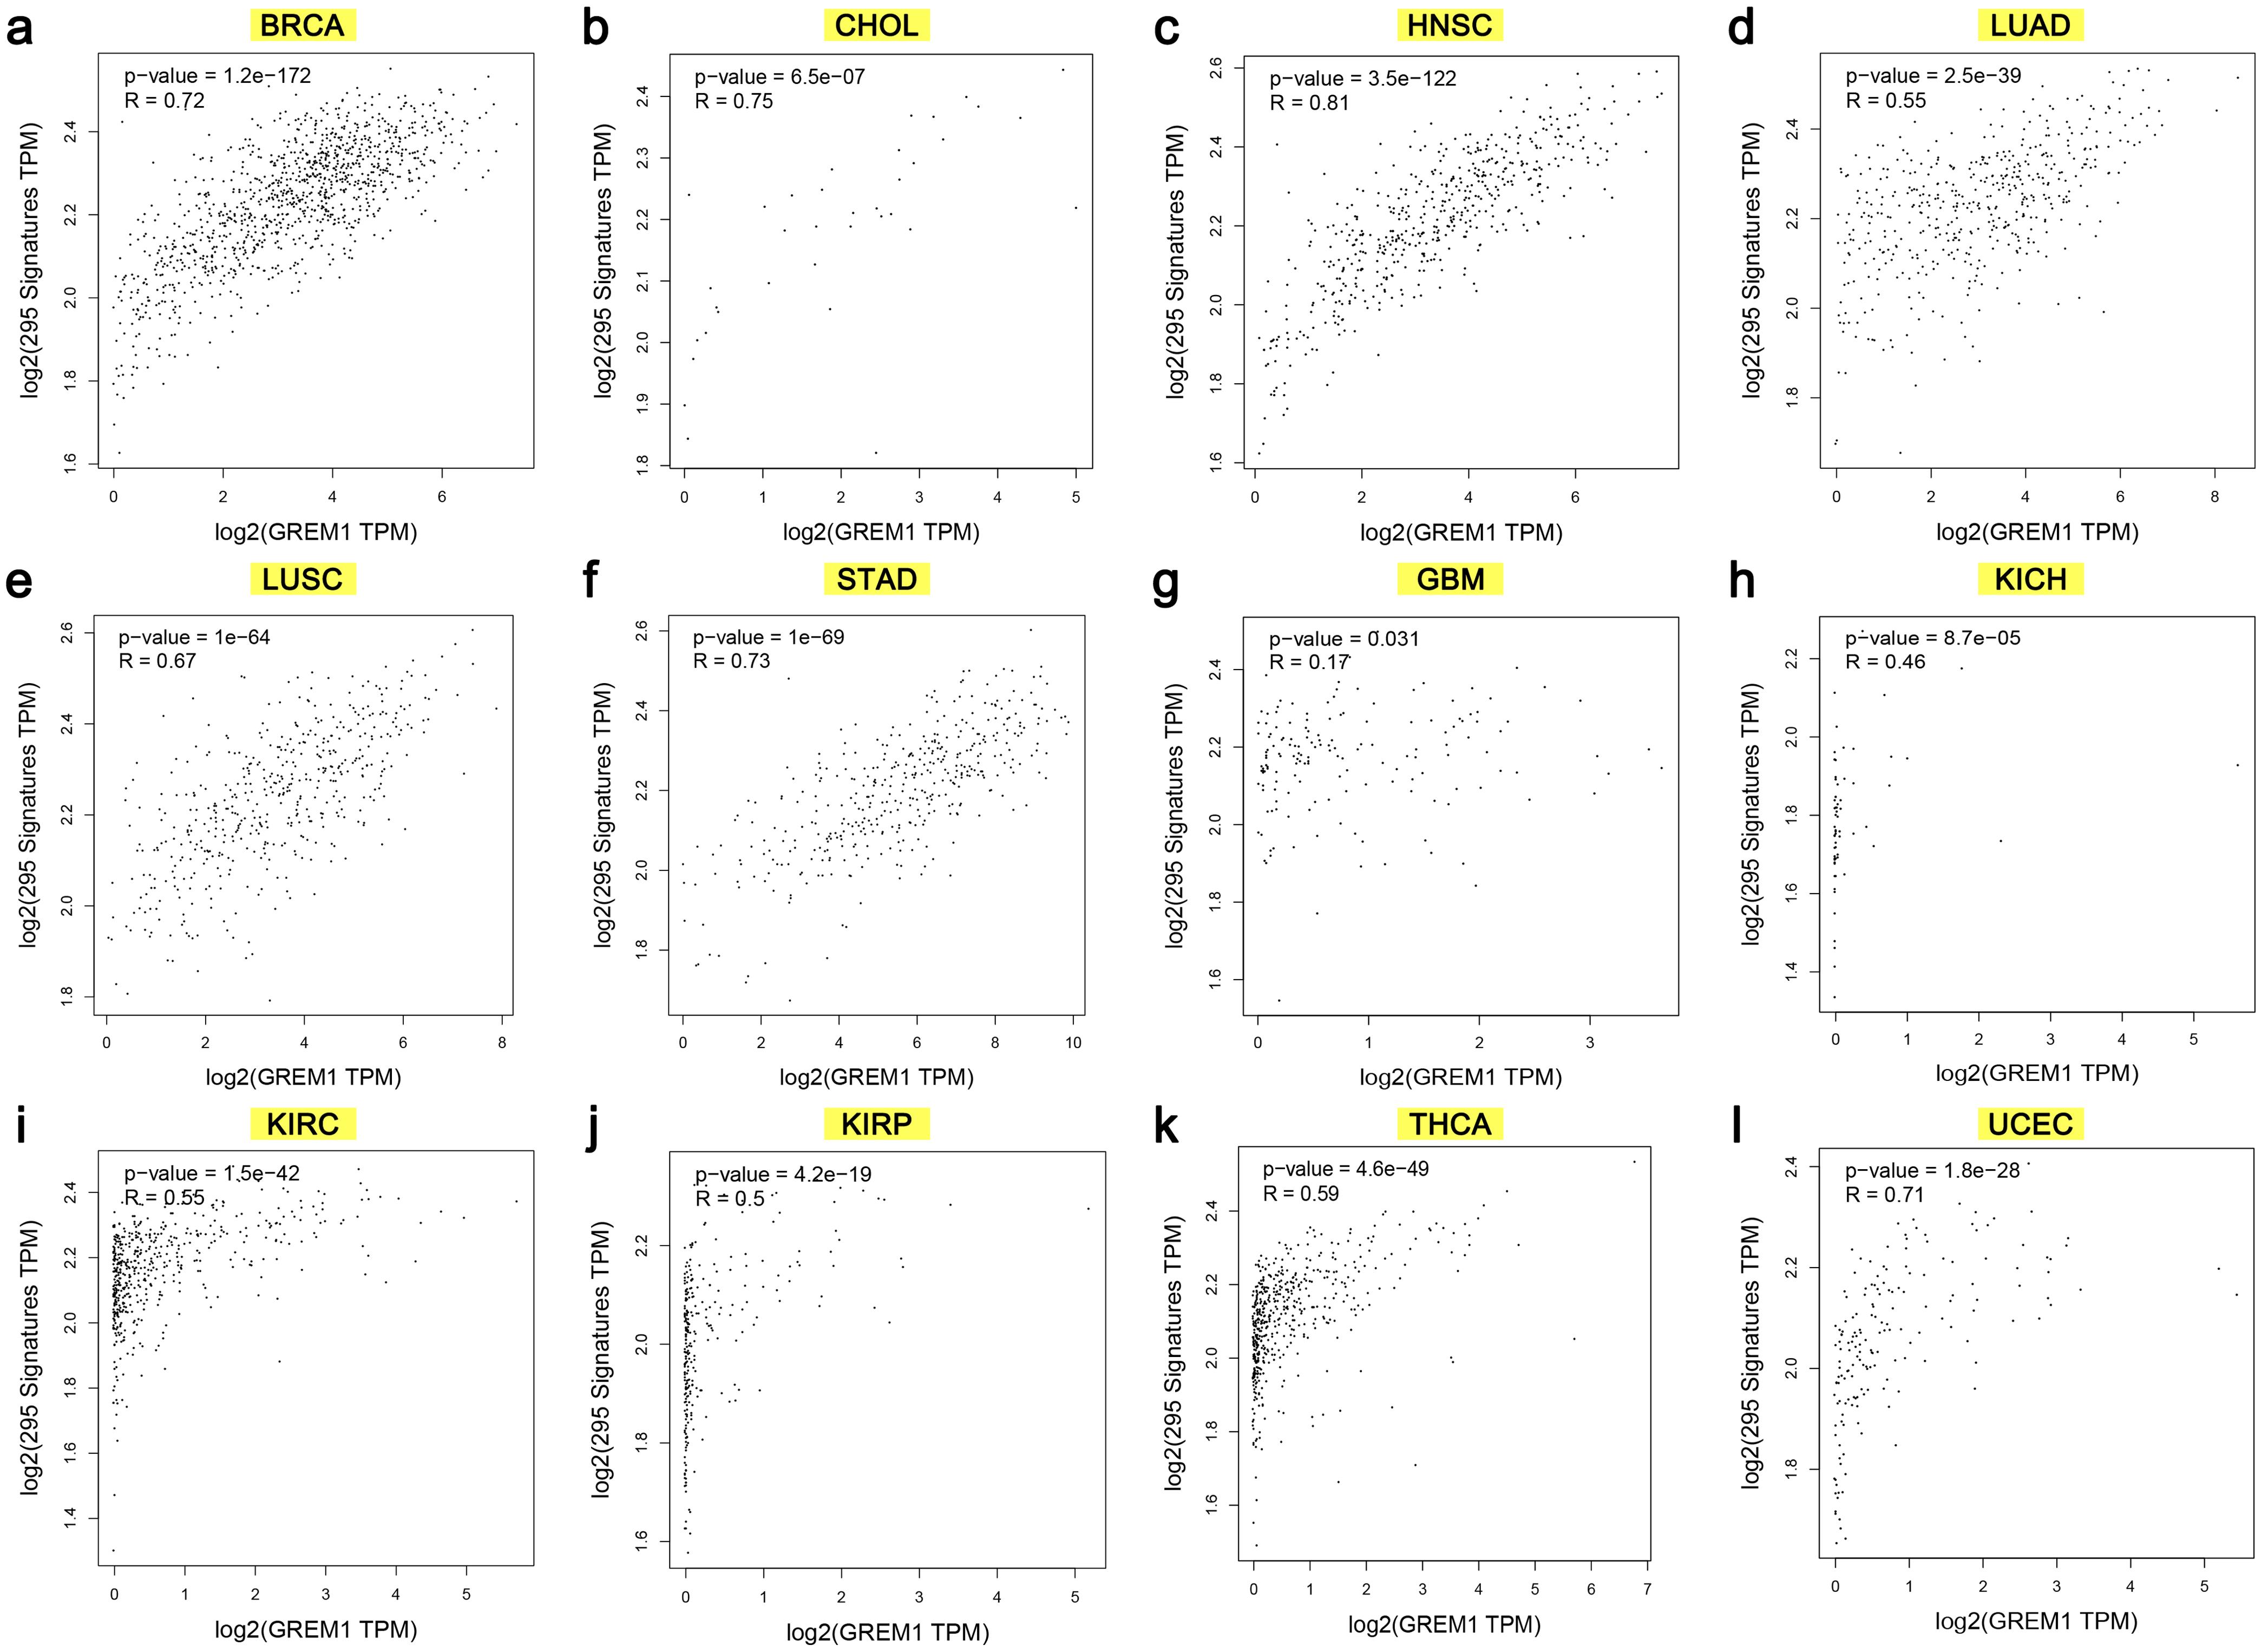 Correlation of fibrotic status and GREM1 expression in 12 cancer types.